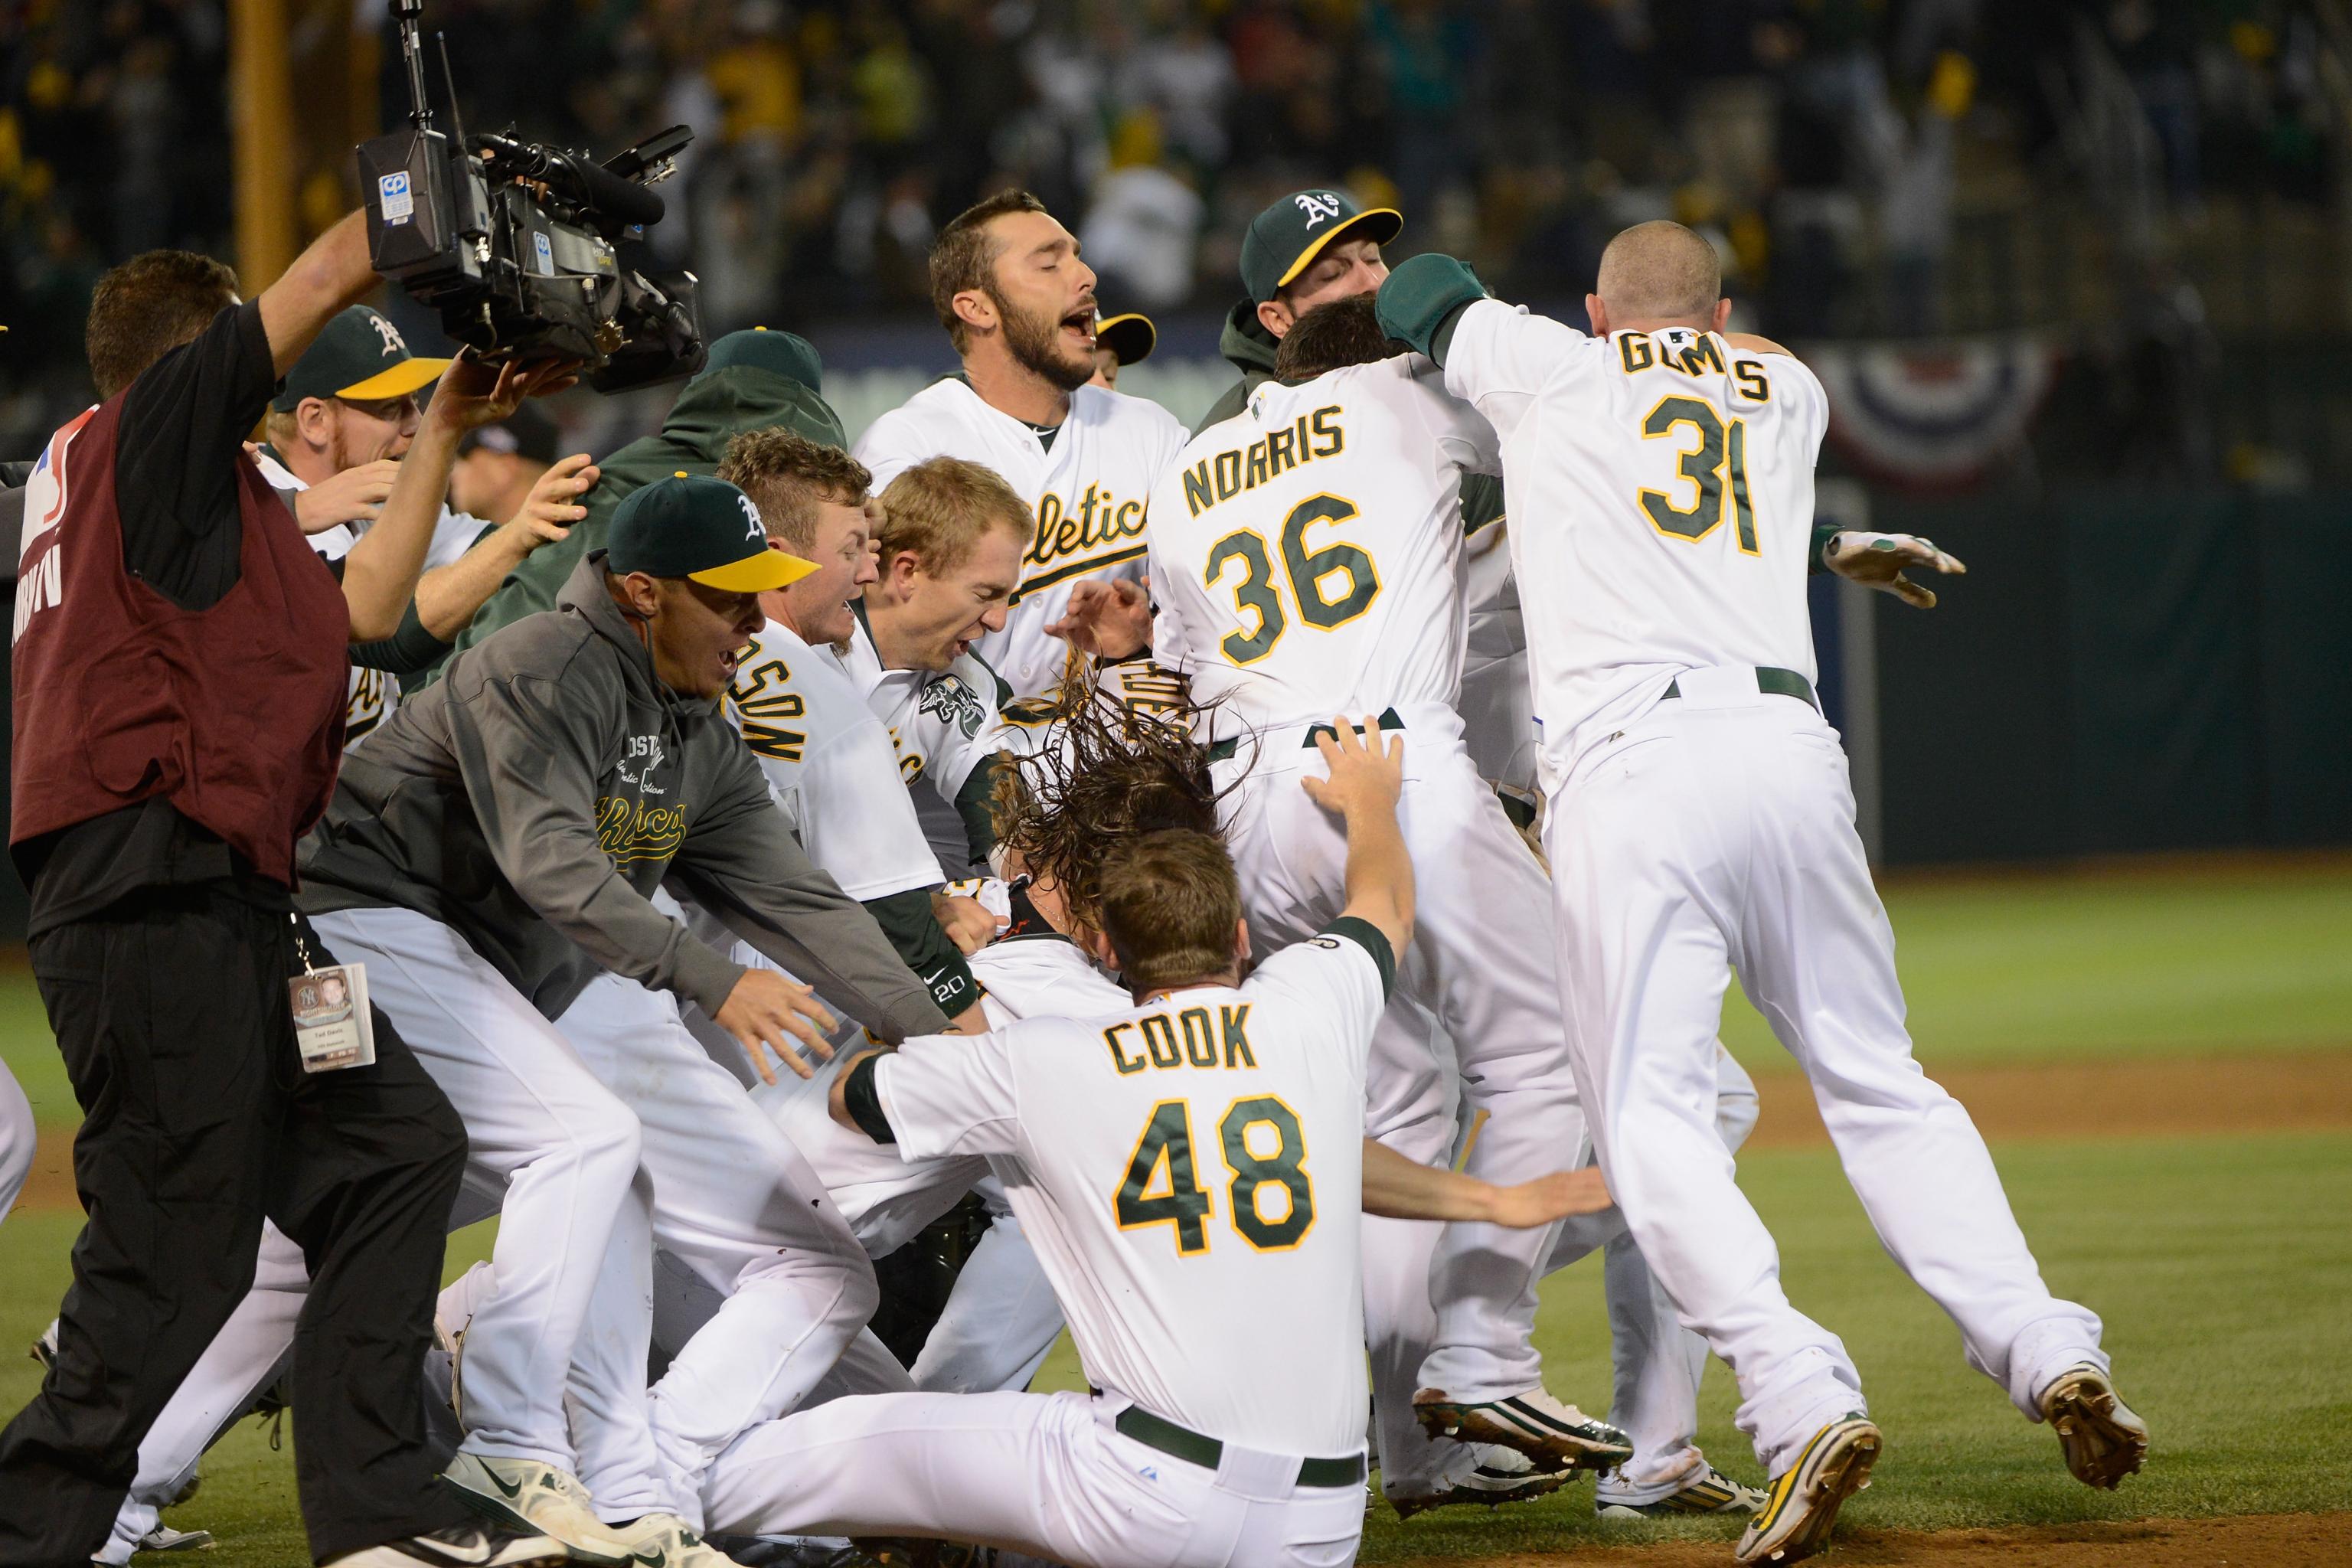 Billy Beane keeping Oakland A's competitive